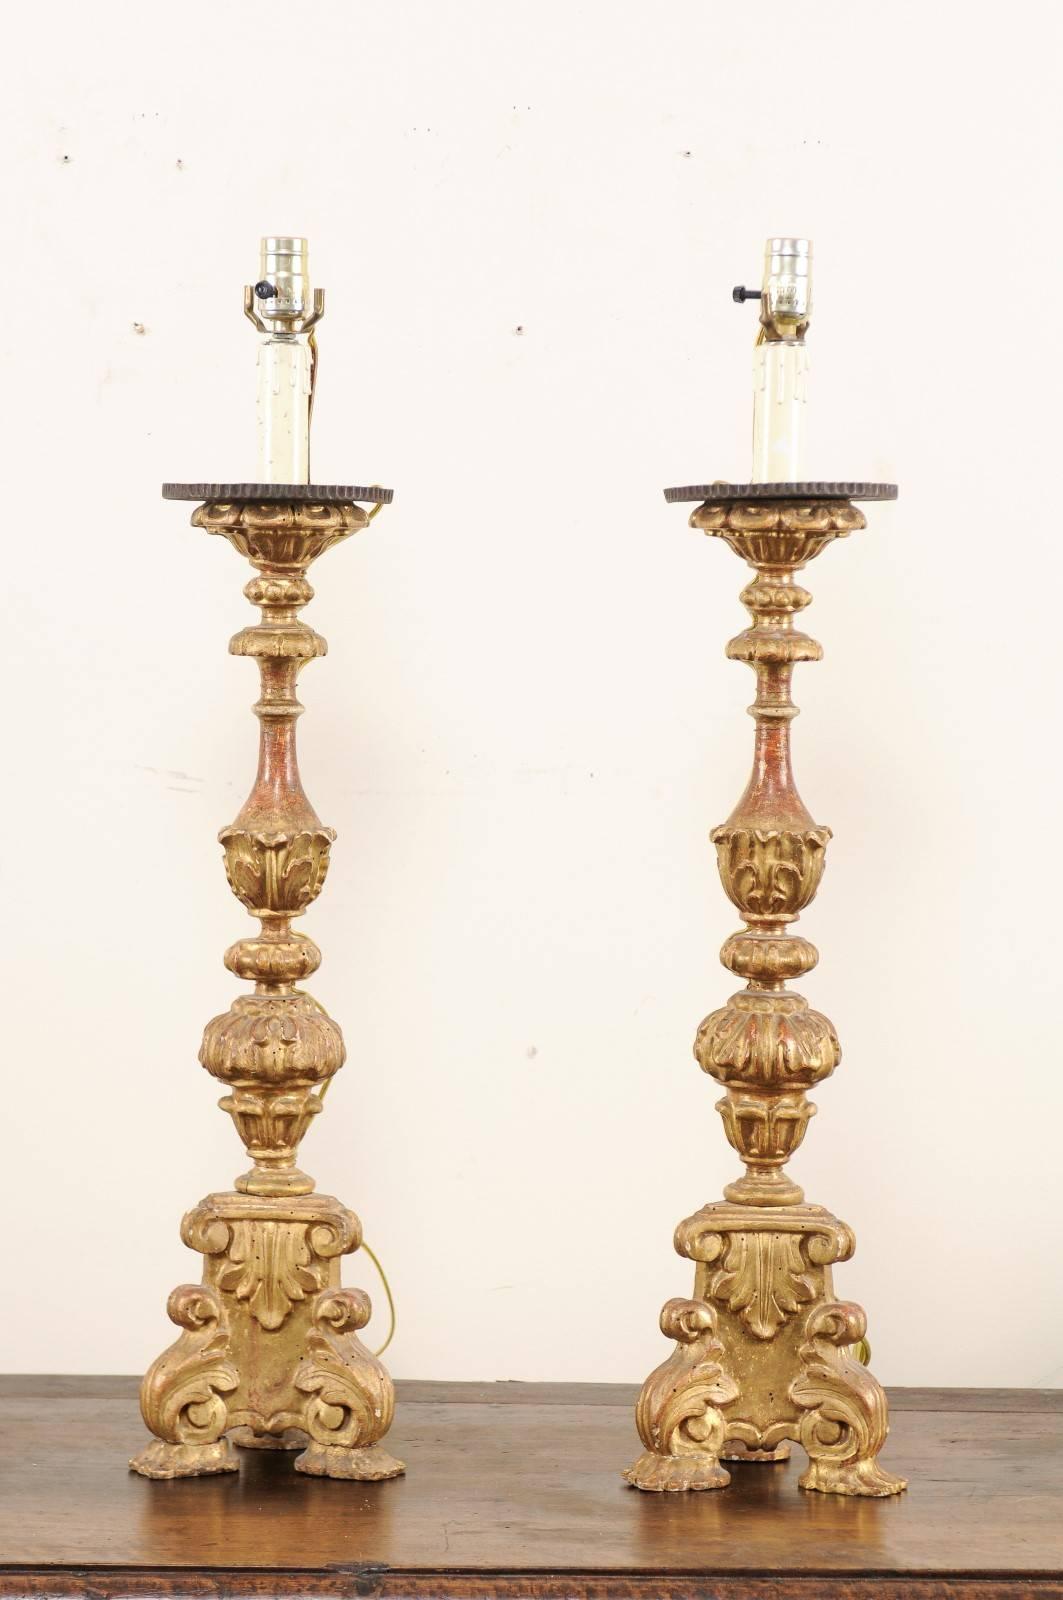 A pair of 19th century Italian gilded candlestick lamps. This pair of Italian 19th century (or possibly earlier) candlesticks, decorated in leaf and scroll motif carvings throughout, have been fashioned into table lamps. These Italian gilded lamps